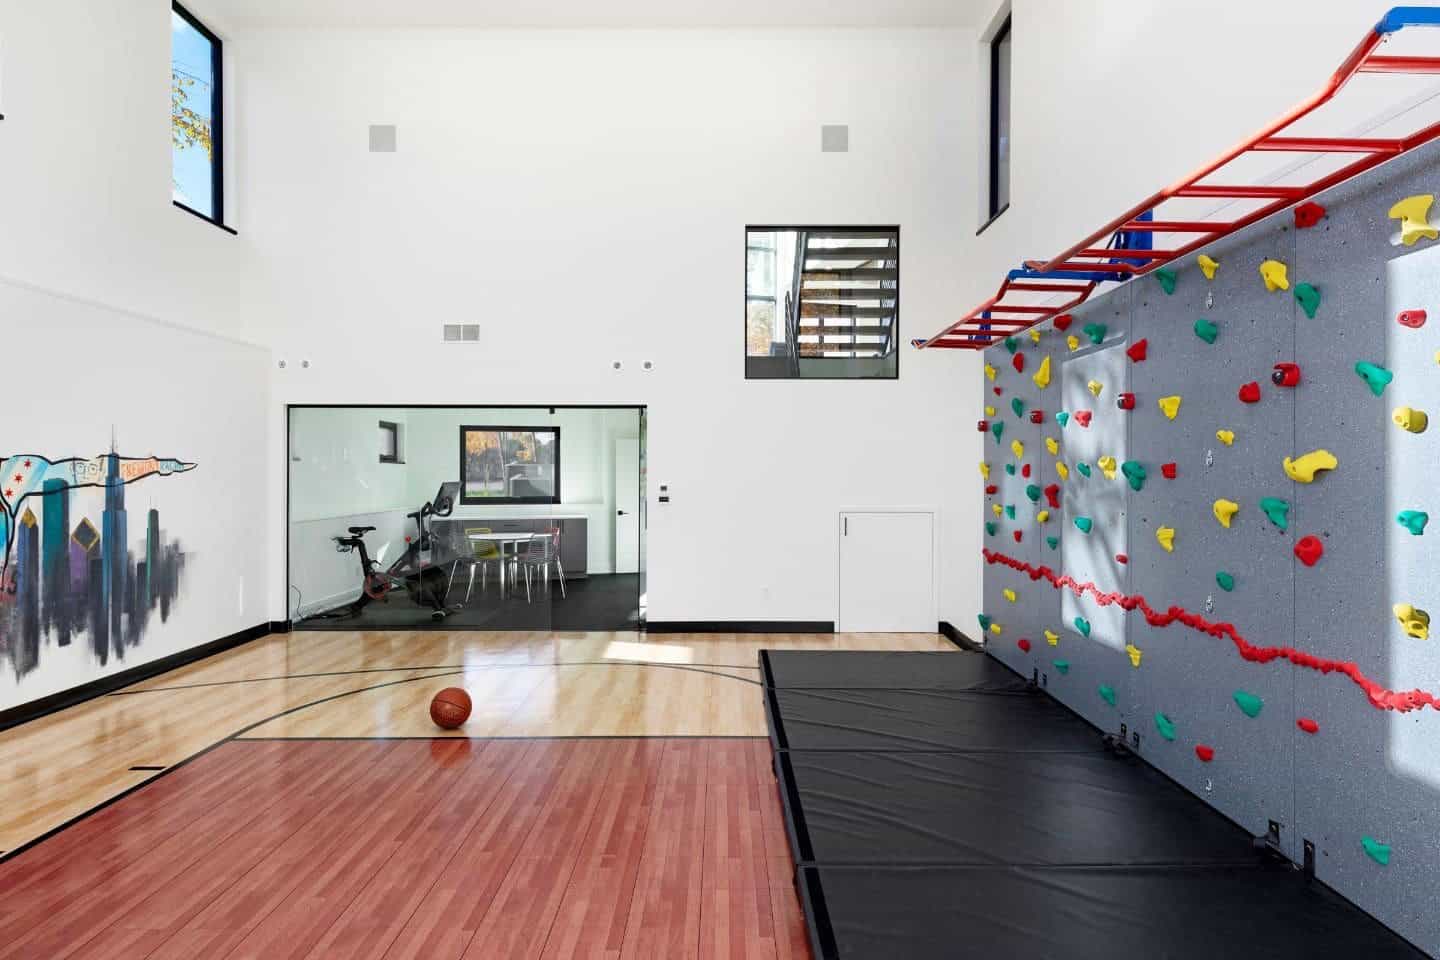 modern-lake-house-sport-court-with-climbing-wall